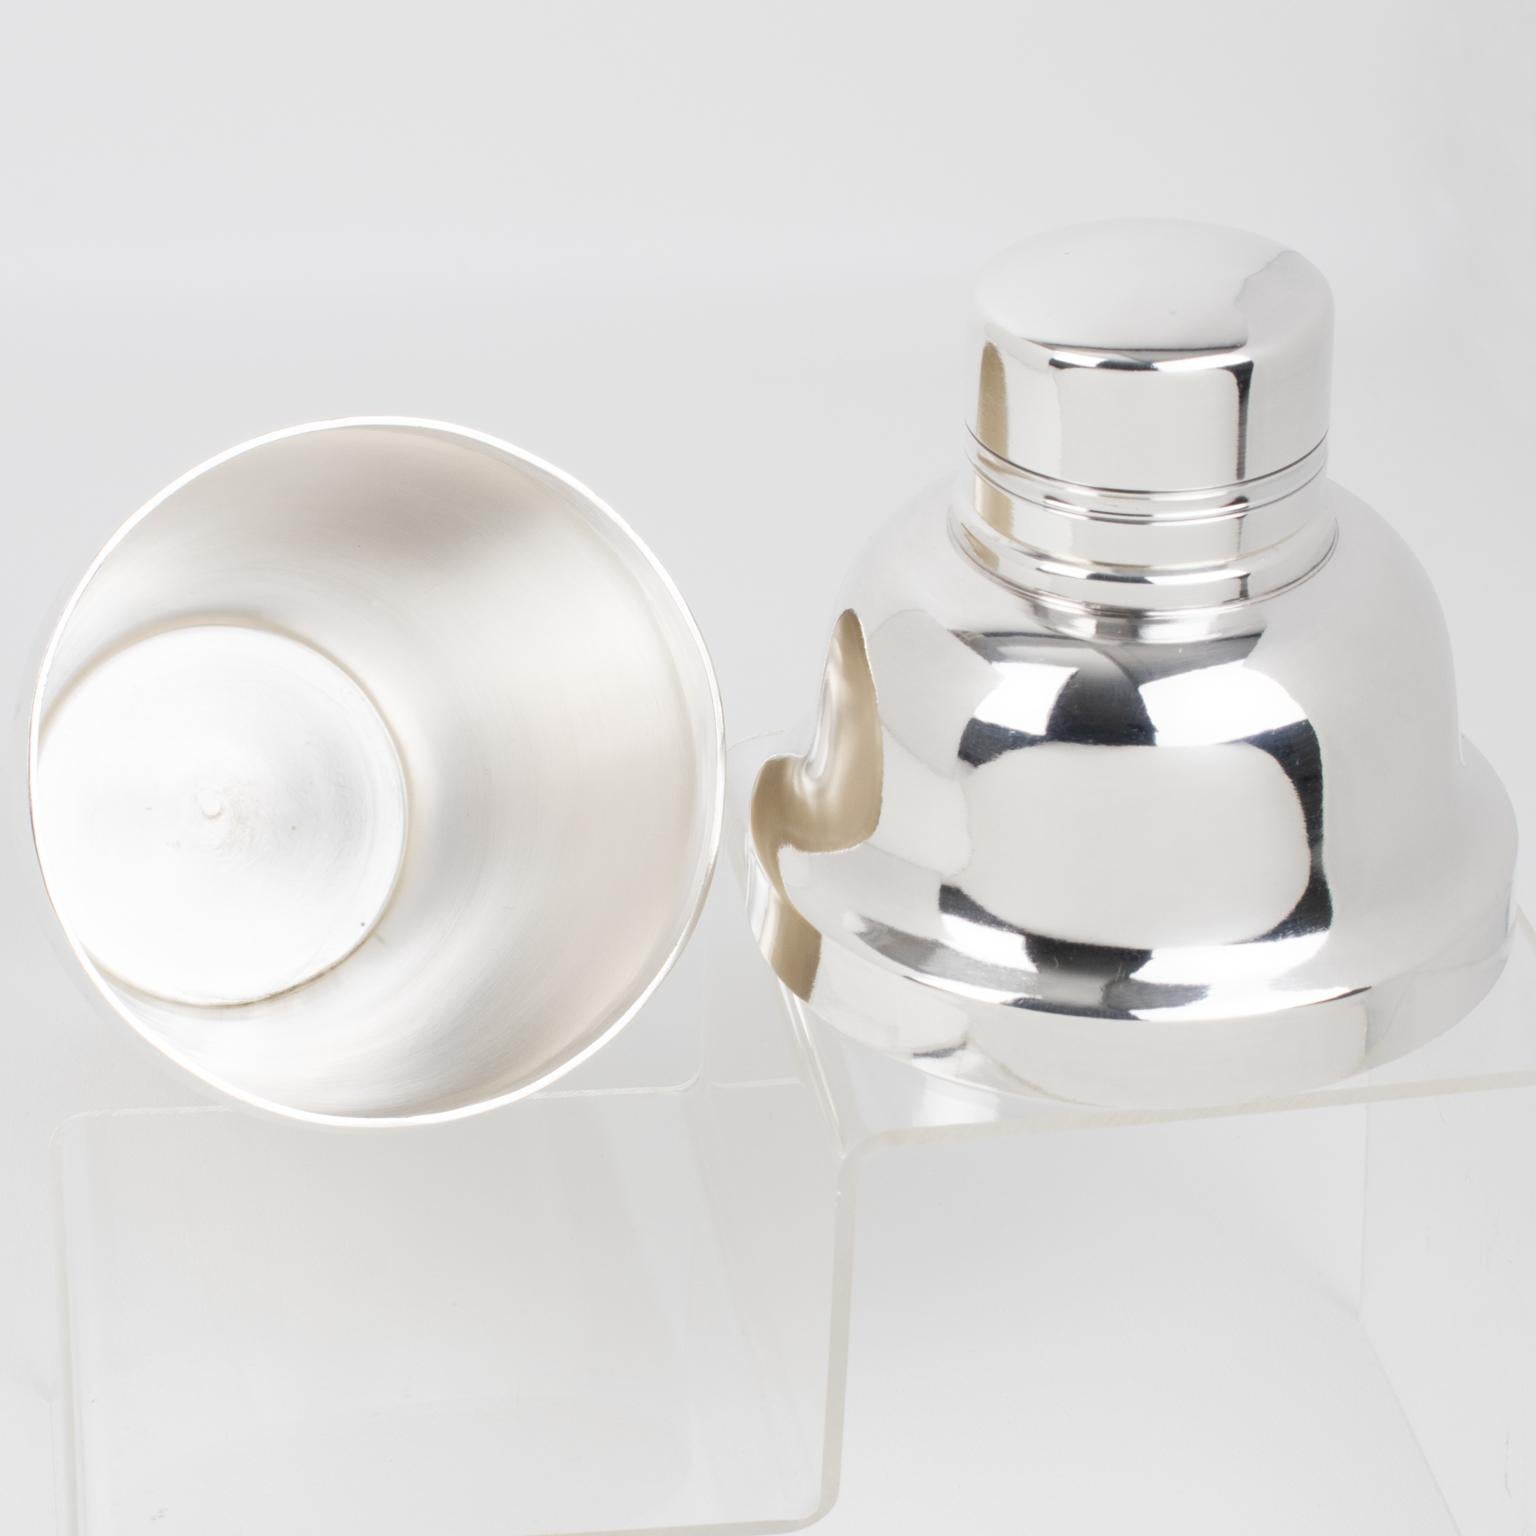 Mid-20th Century French Art Deco Silver Plate Cocktail Shaker by Orfevrerie Boyer, 1940s For Sale